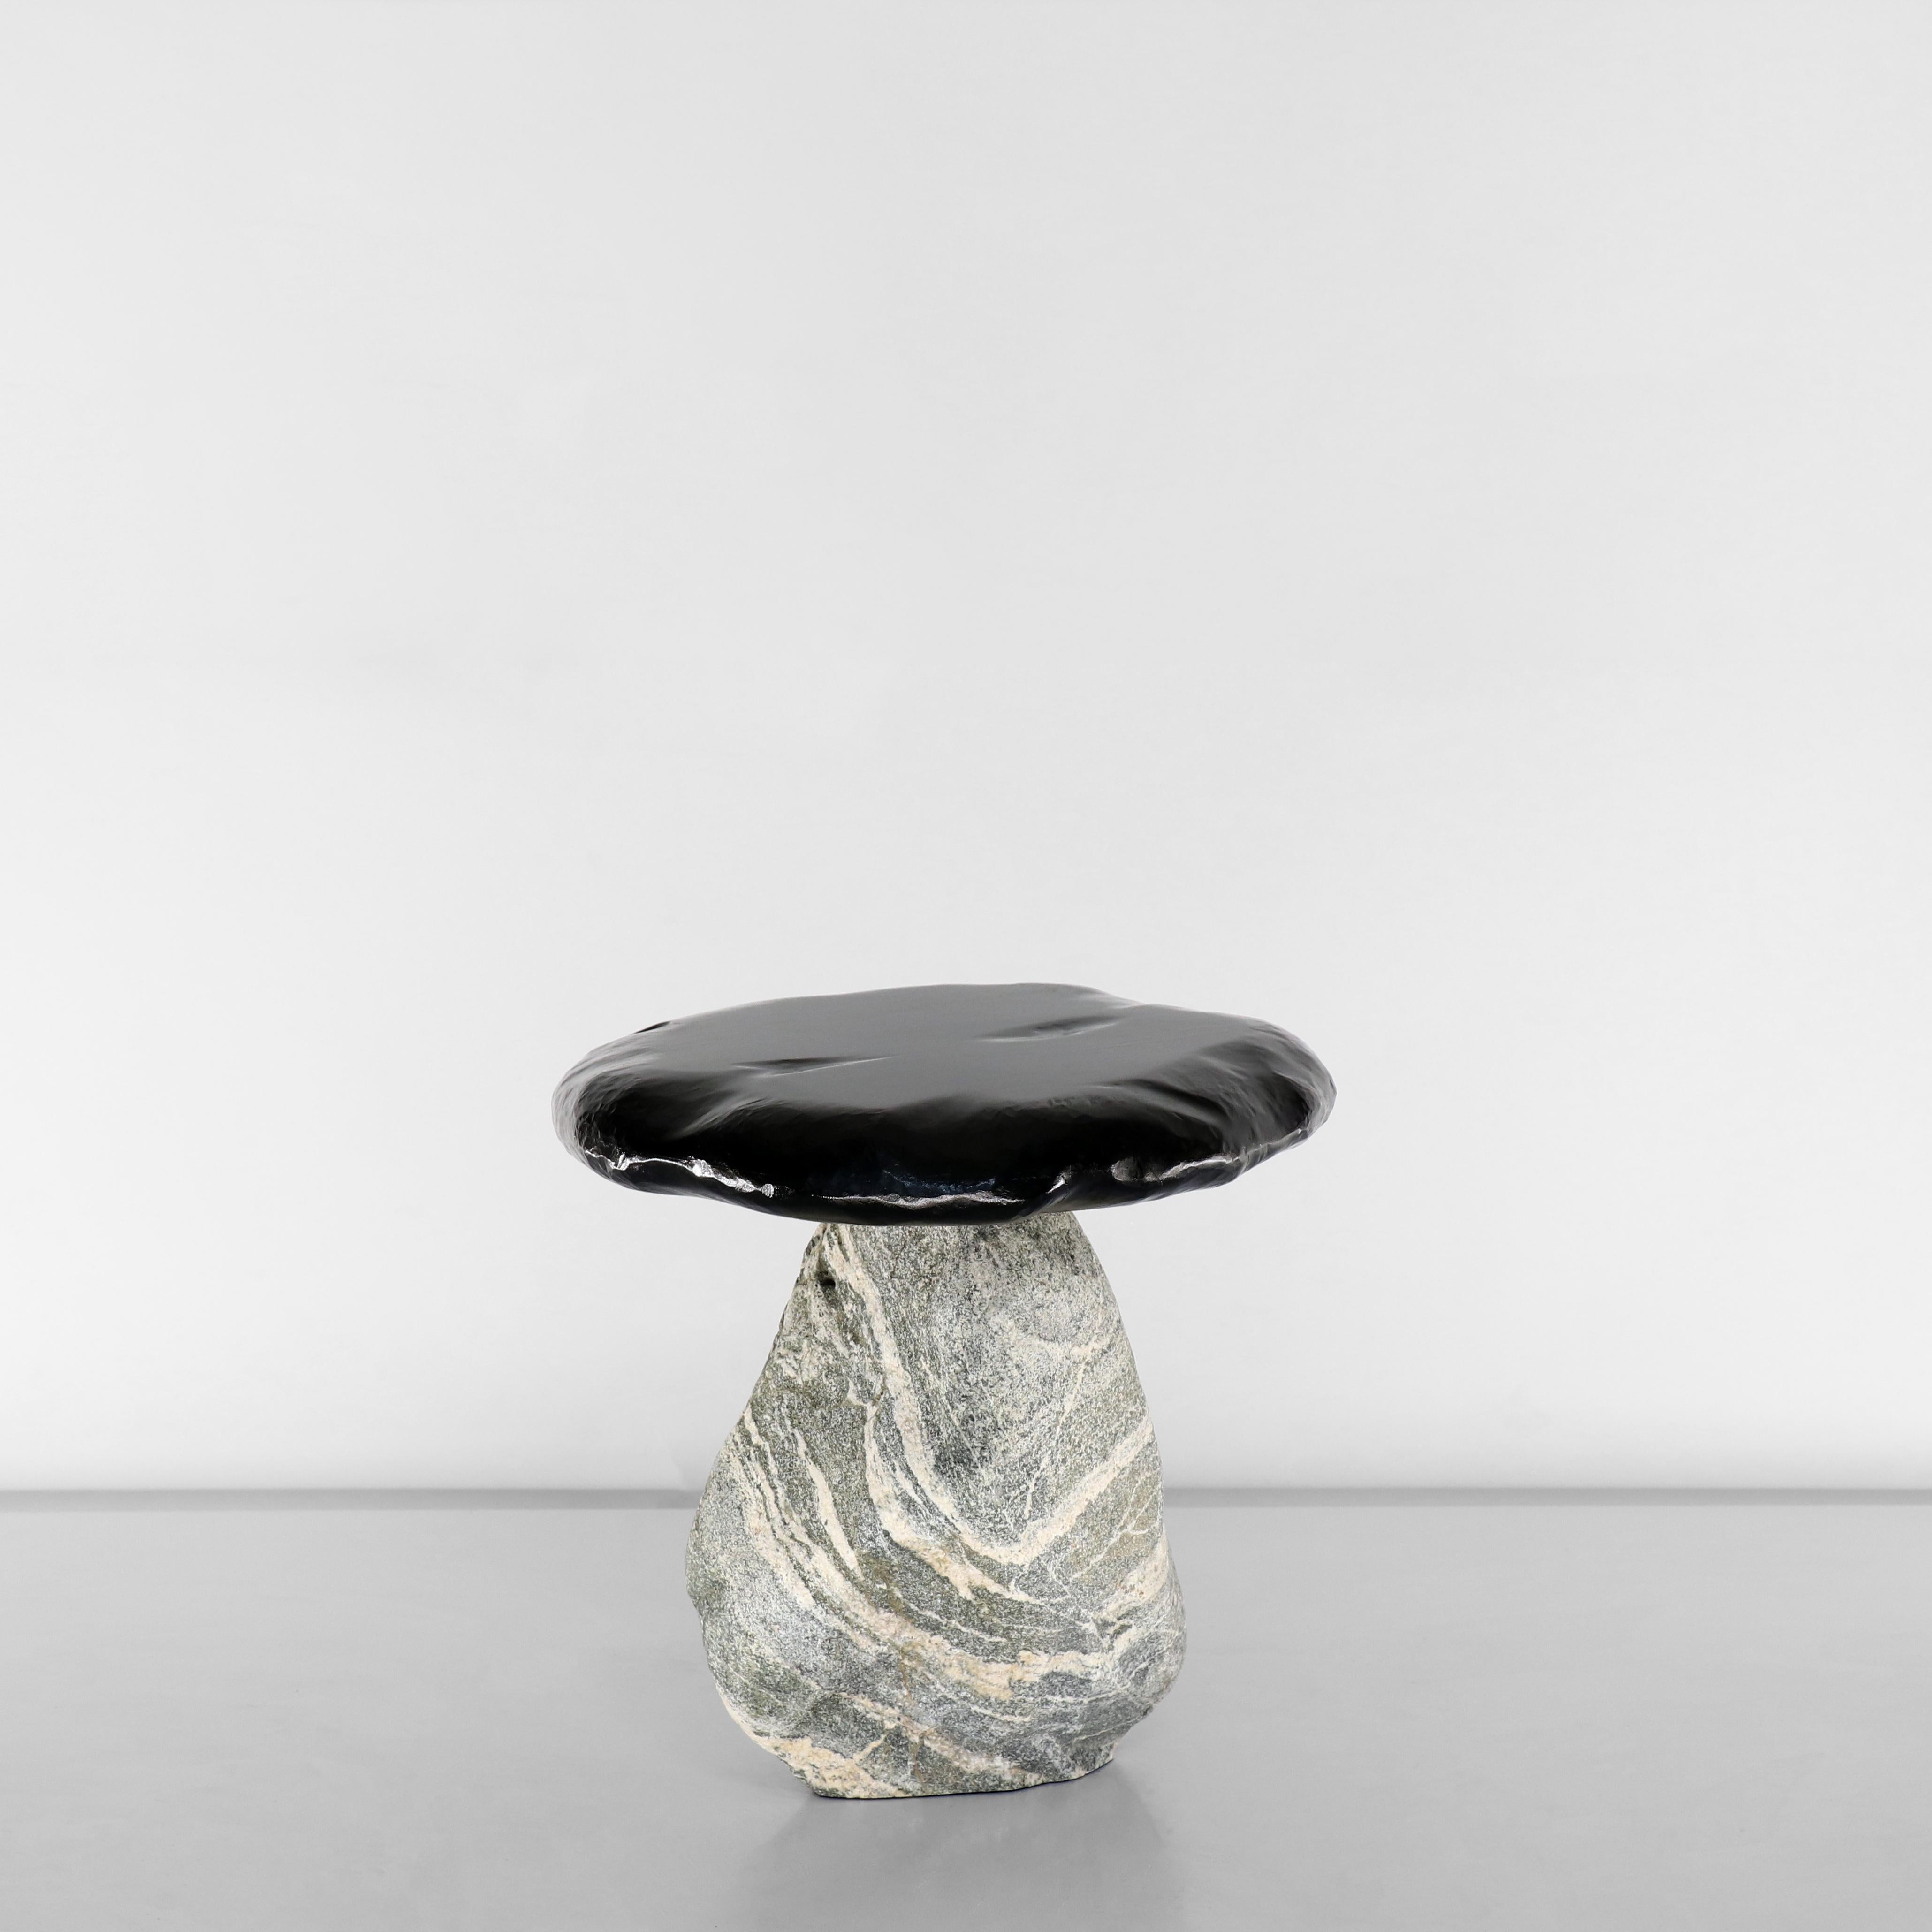 Bolete Side Table by Henry D'ath
In collaboration with Batten and Kamp
Dimensions: D 40 x W 45 x H 45 cm
Materials: Wood, granite.
Available in natural or black ink finishes.

The Bolete side table. A serendipitous pairing of elements defined